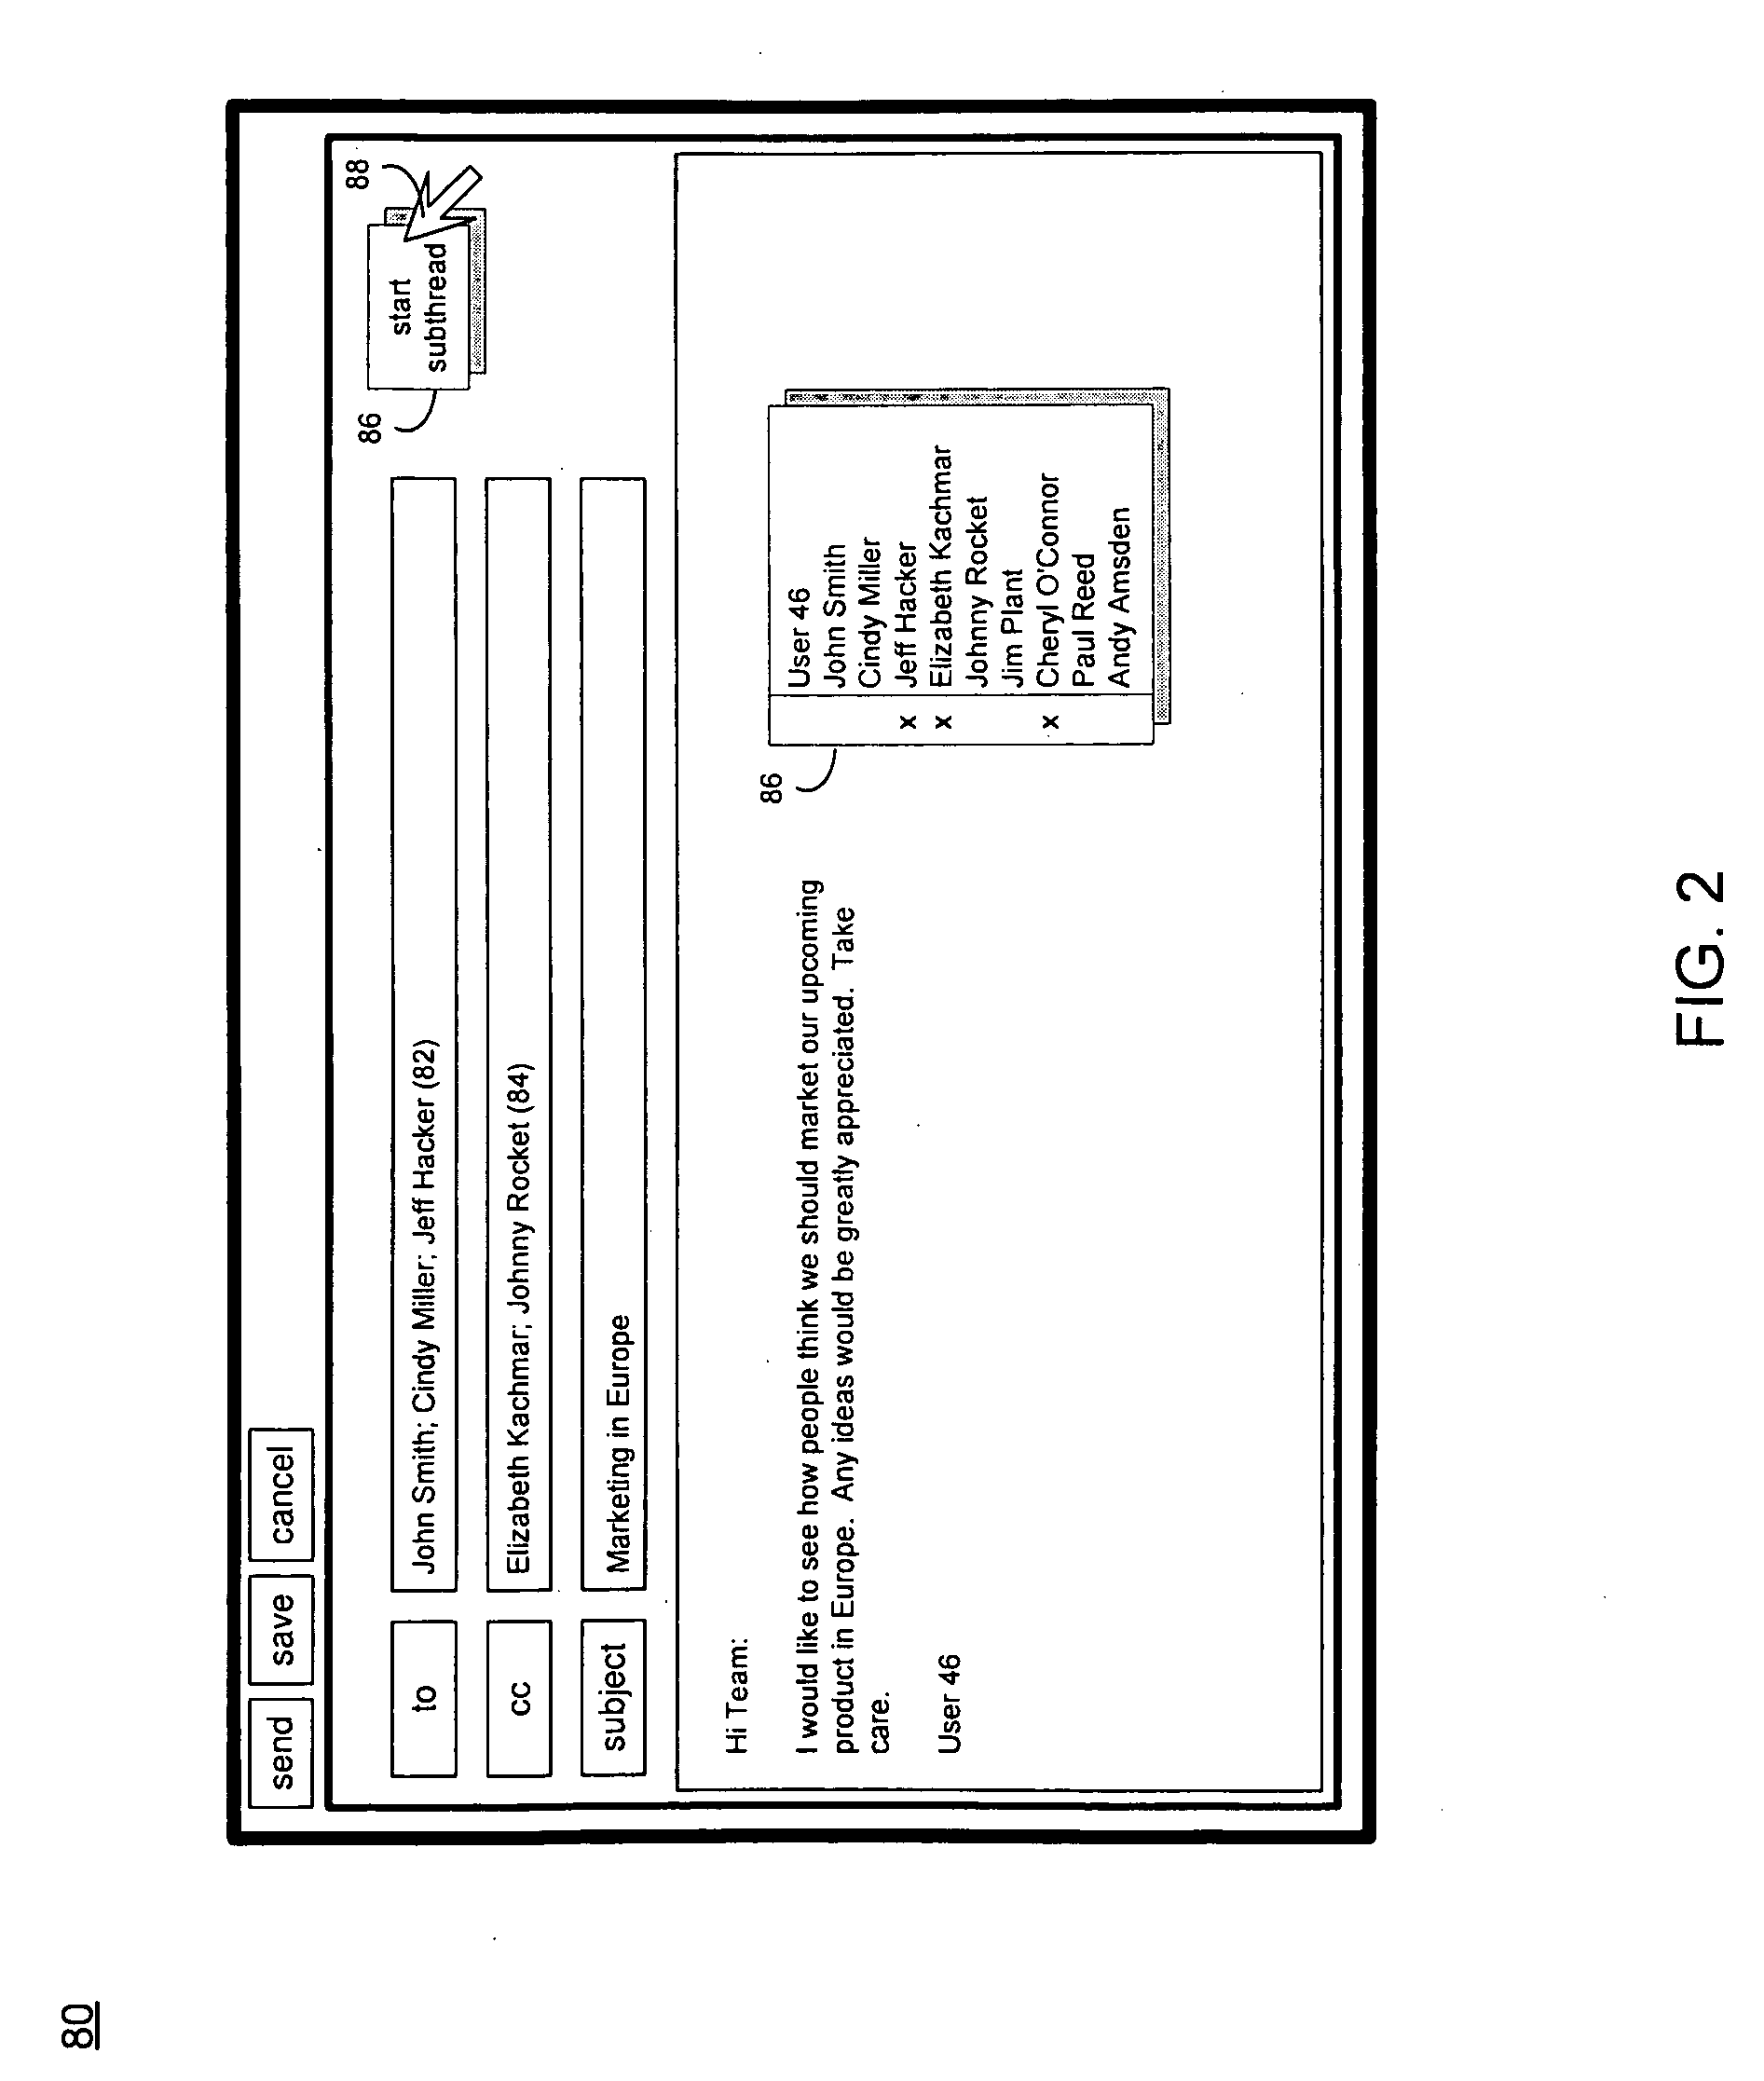 System and method for email thread management